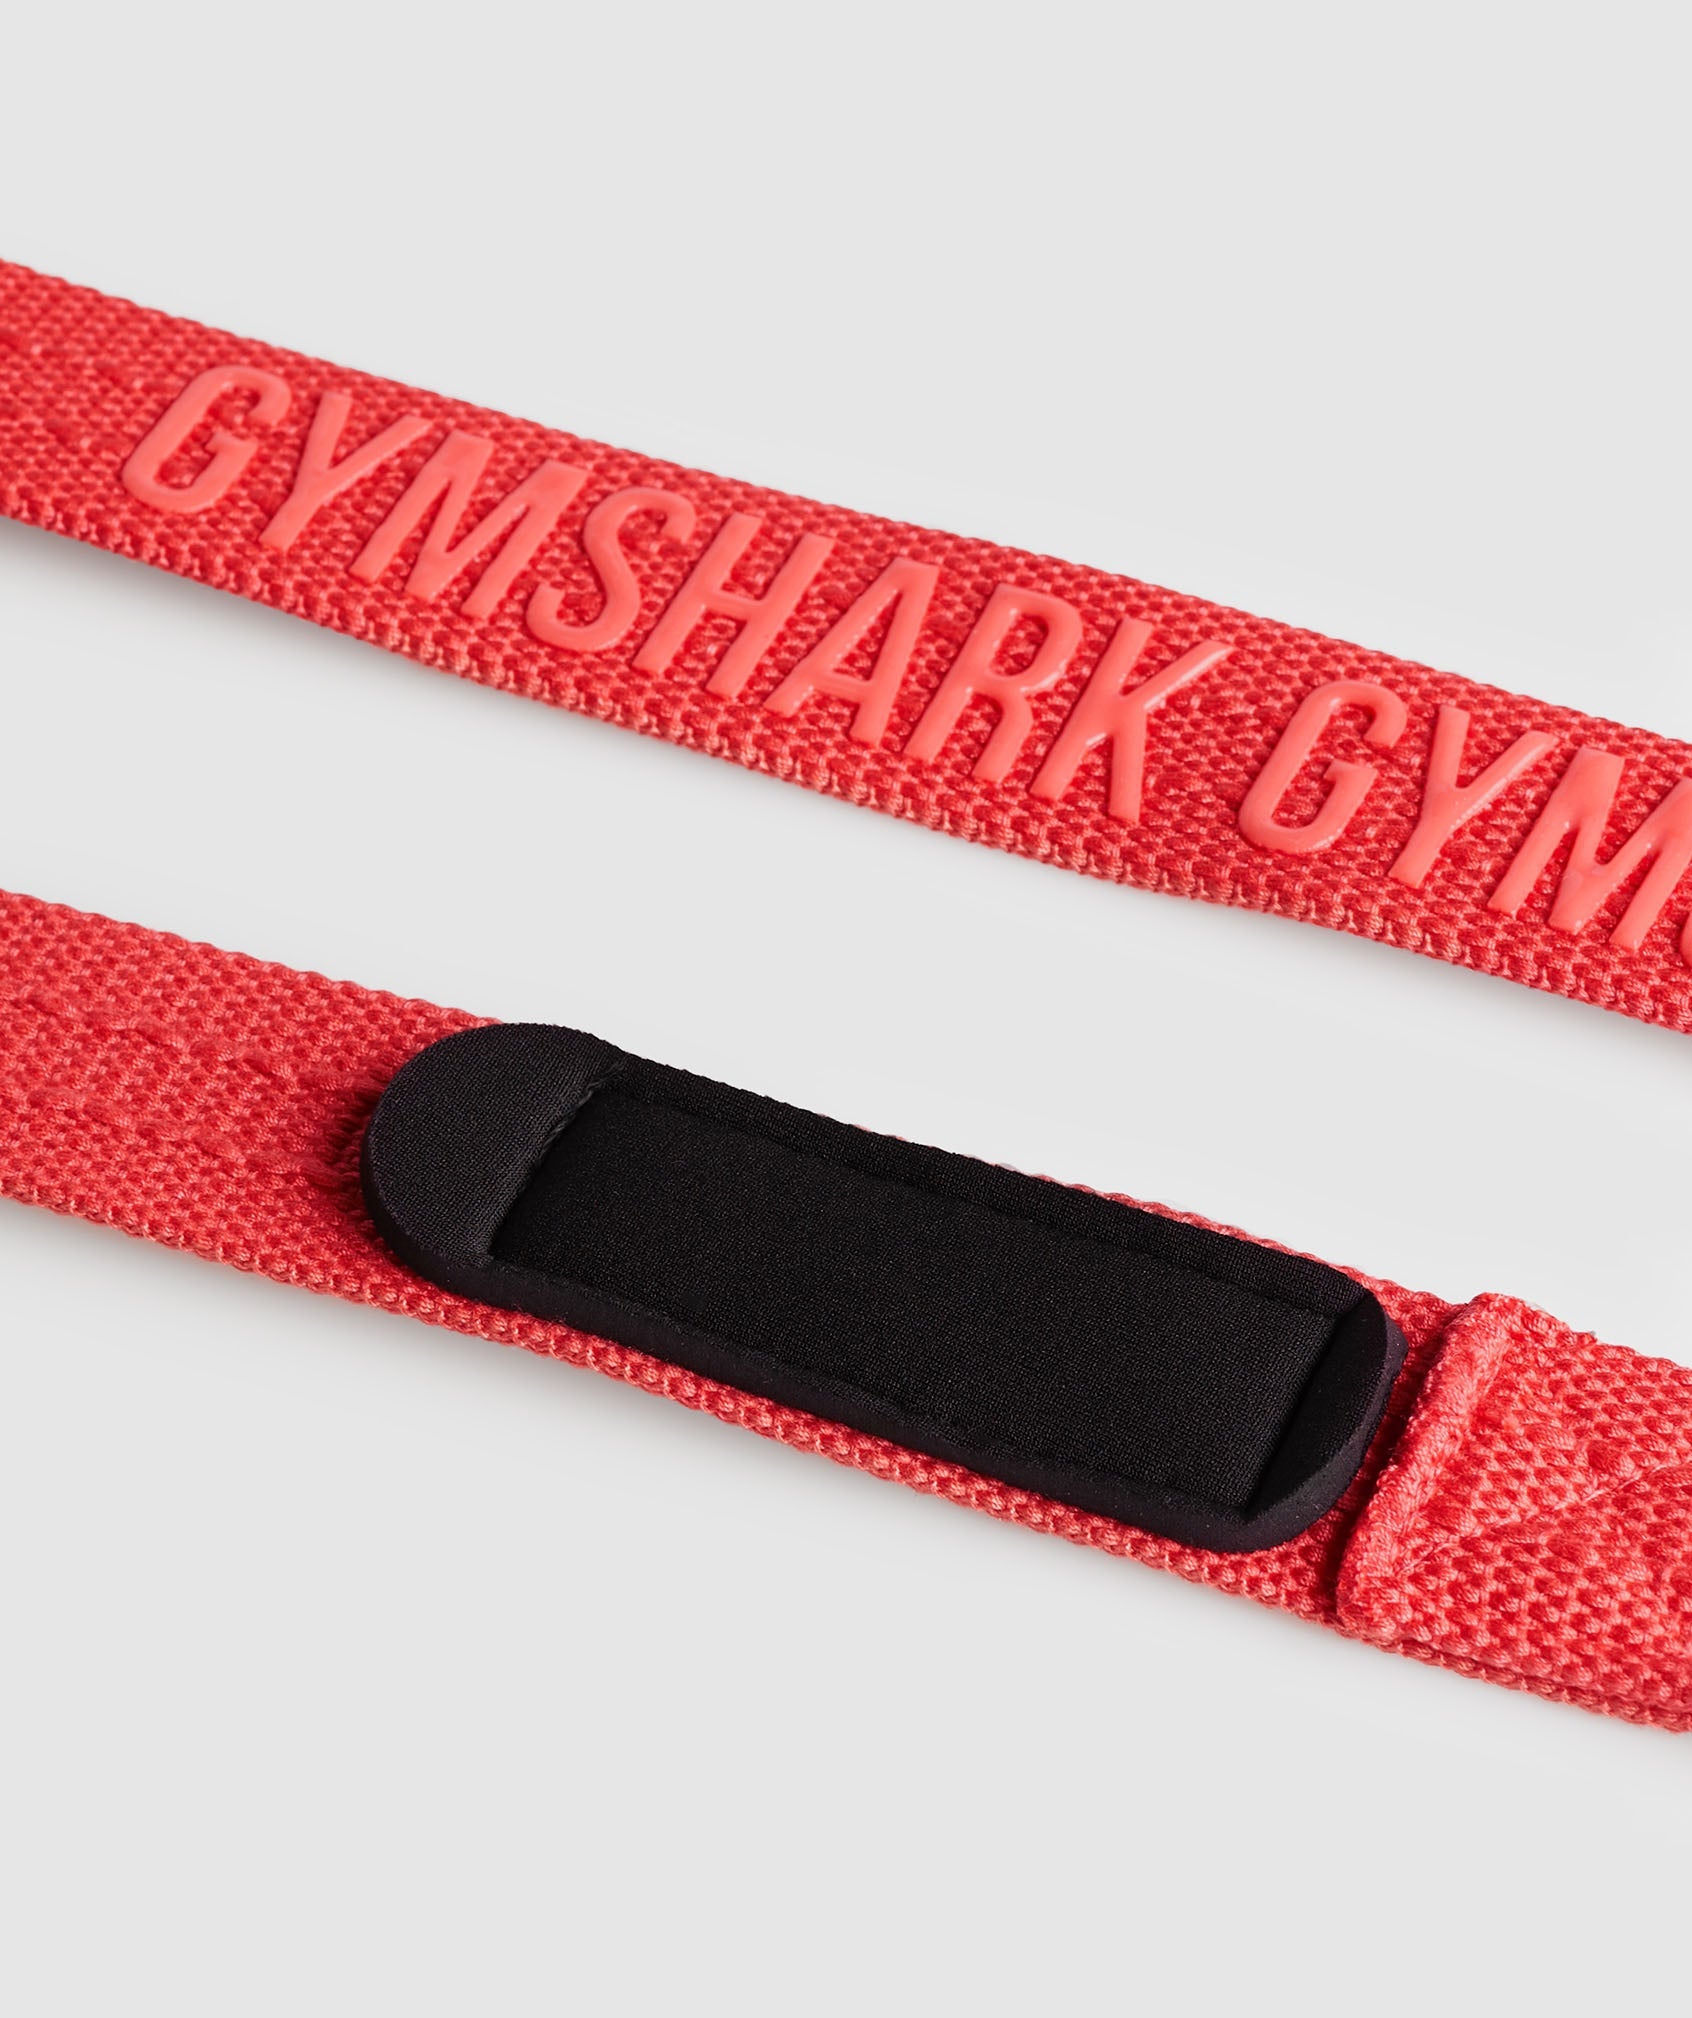 Gymshark Silicone Lifting Straps - Fly Coral